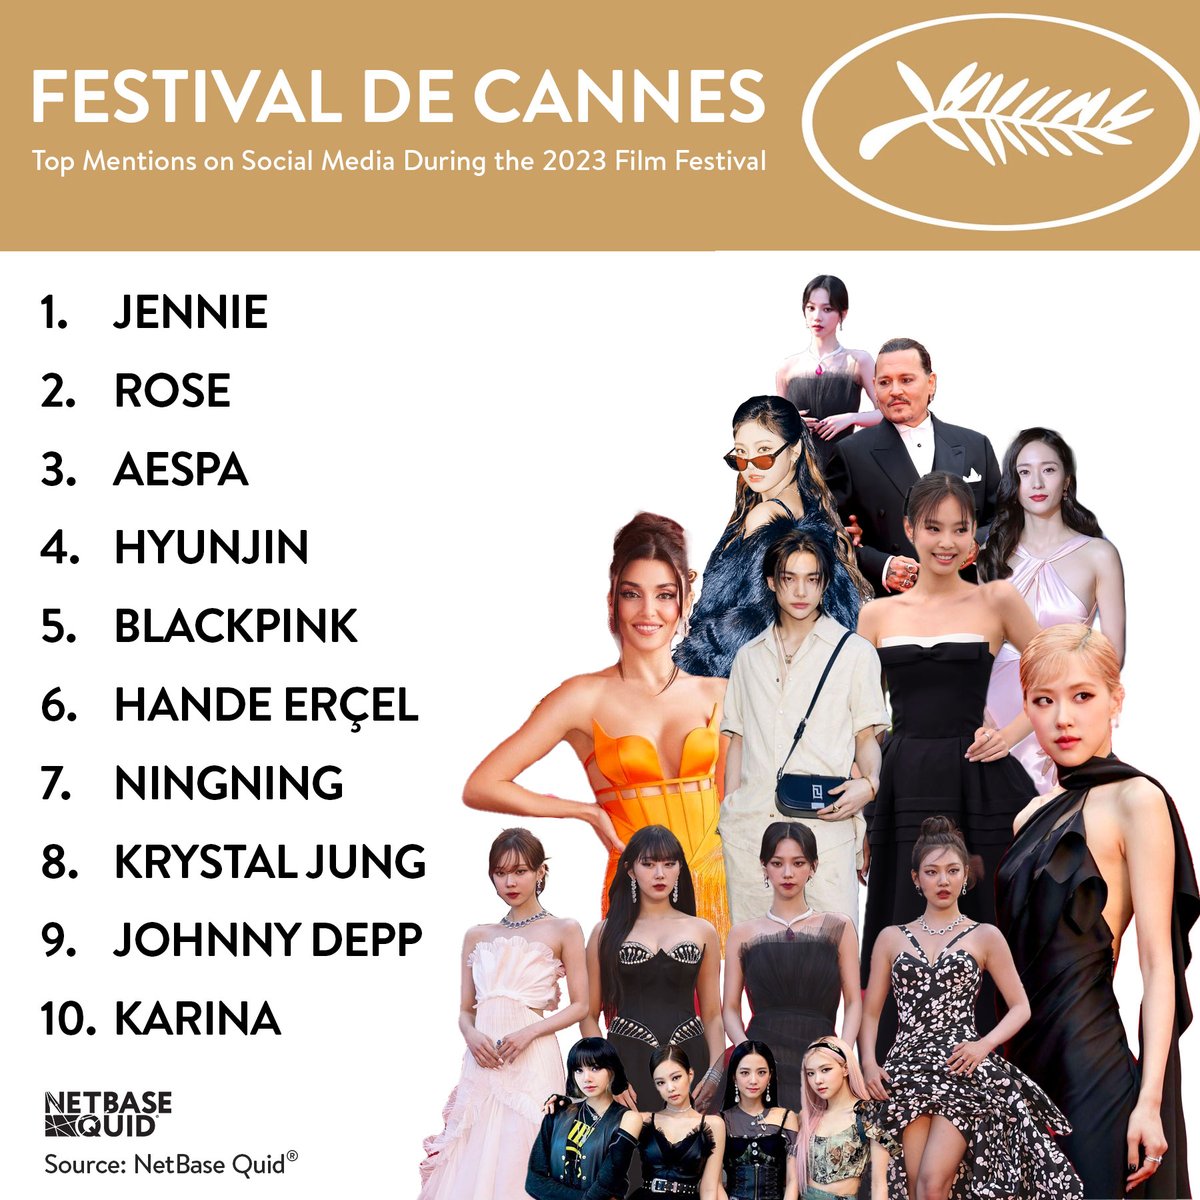 The #Cannes2023 Film Festival brought some big names to the French Riviera. Here are the top 10 mentioned artists on social during @Festival_Cannes:

1. #JENNIE
2. #ROSÉ
3. #AESPA
4. #HYUNJIN
5. #BLACKPINK
6. #HandeErcel
7.  #Ningning
8. #KrystalJung
9. #JohnnyDepp
10. #KARINA